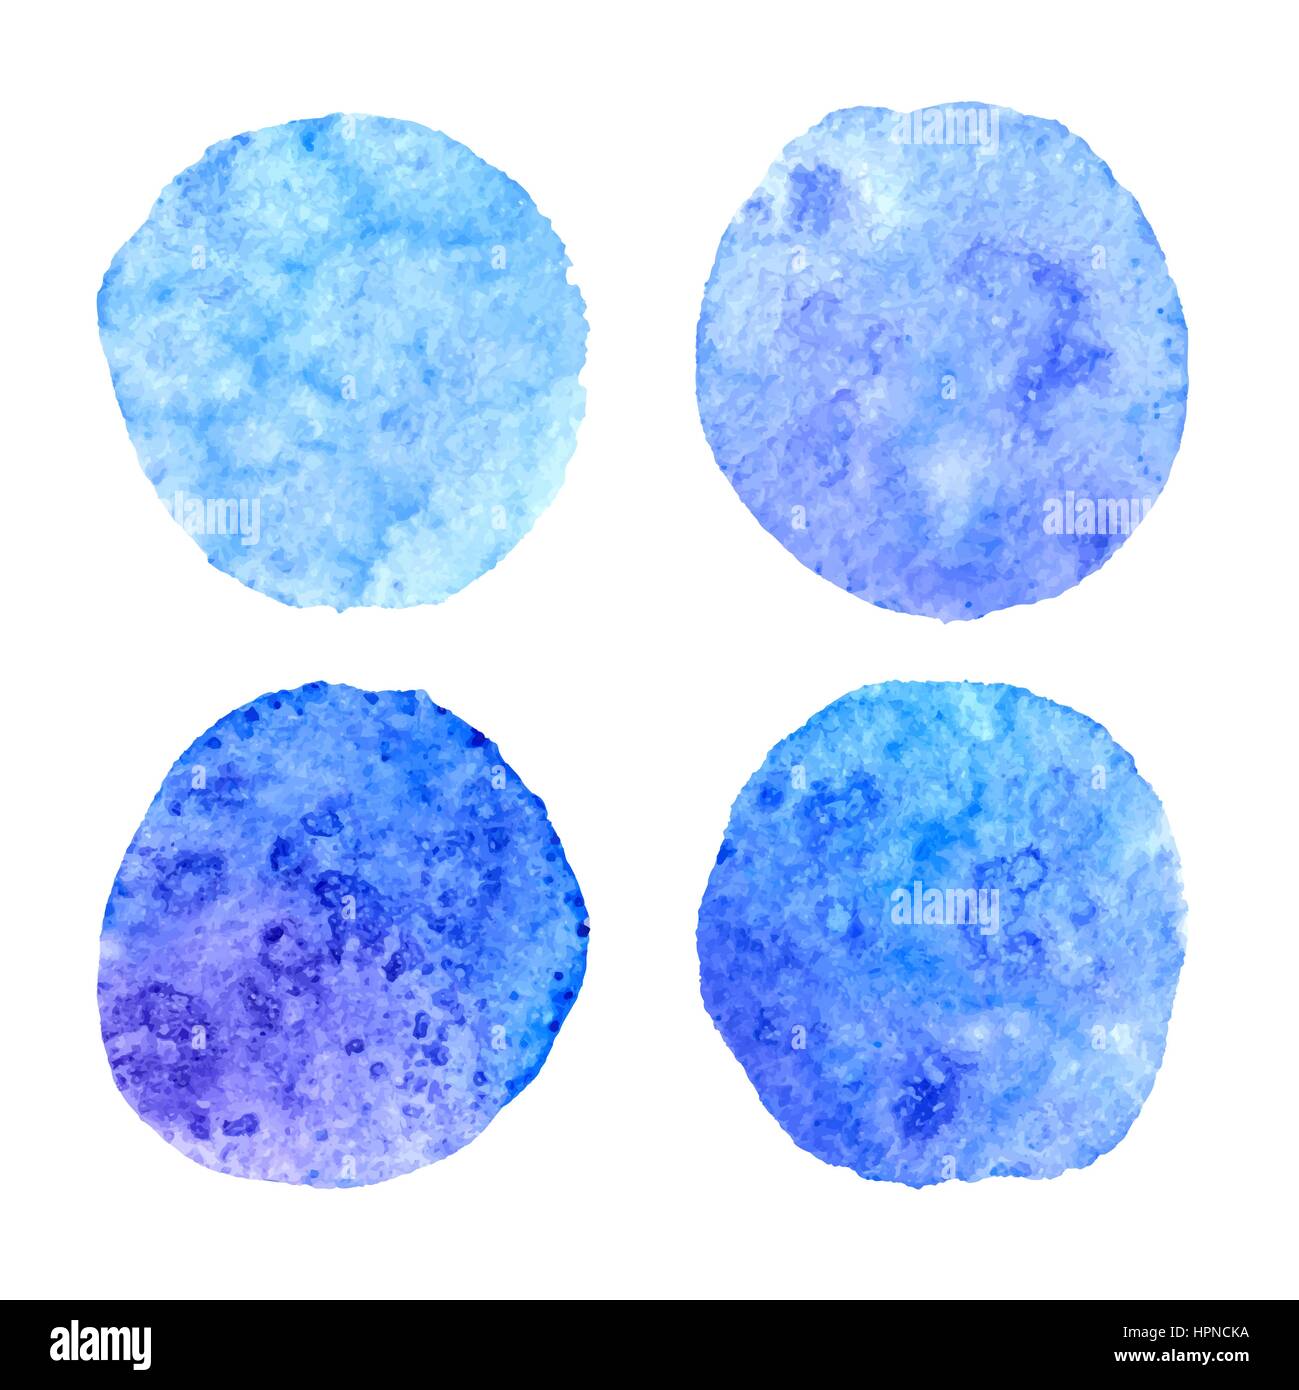 Navy blue watercolor hand drawn banners set. Vector watercolour paper grain textured design elements. Abstract hand paint circle stains isolated on wh Stock Vector